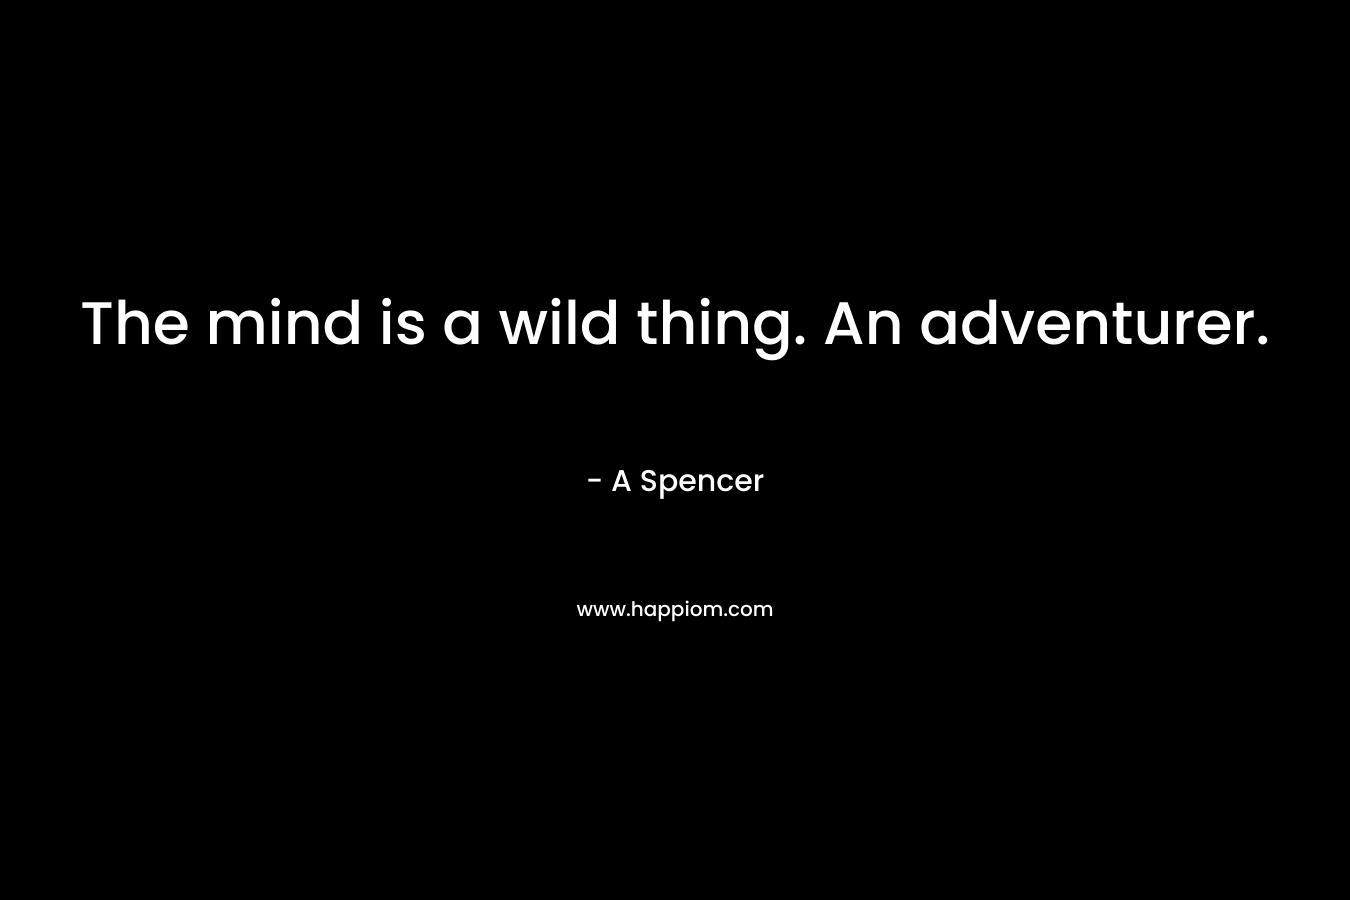 The mind is a wild thing. An adventurer. – A Spencer